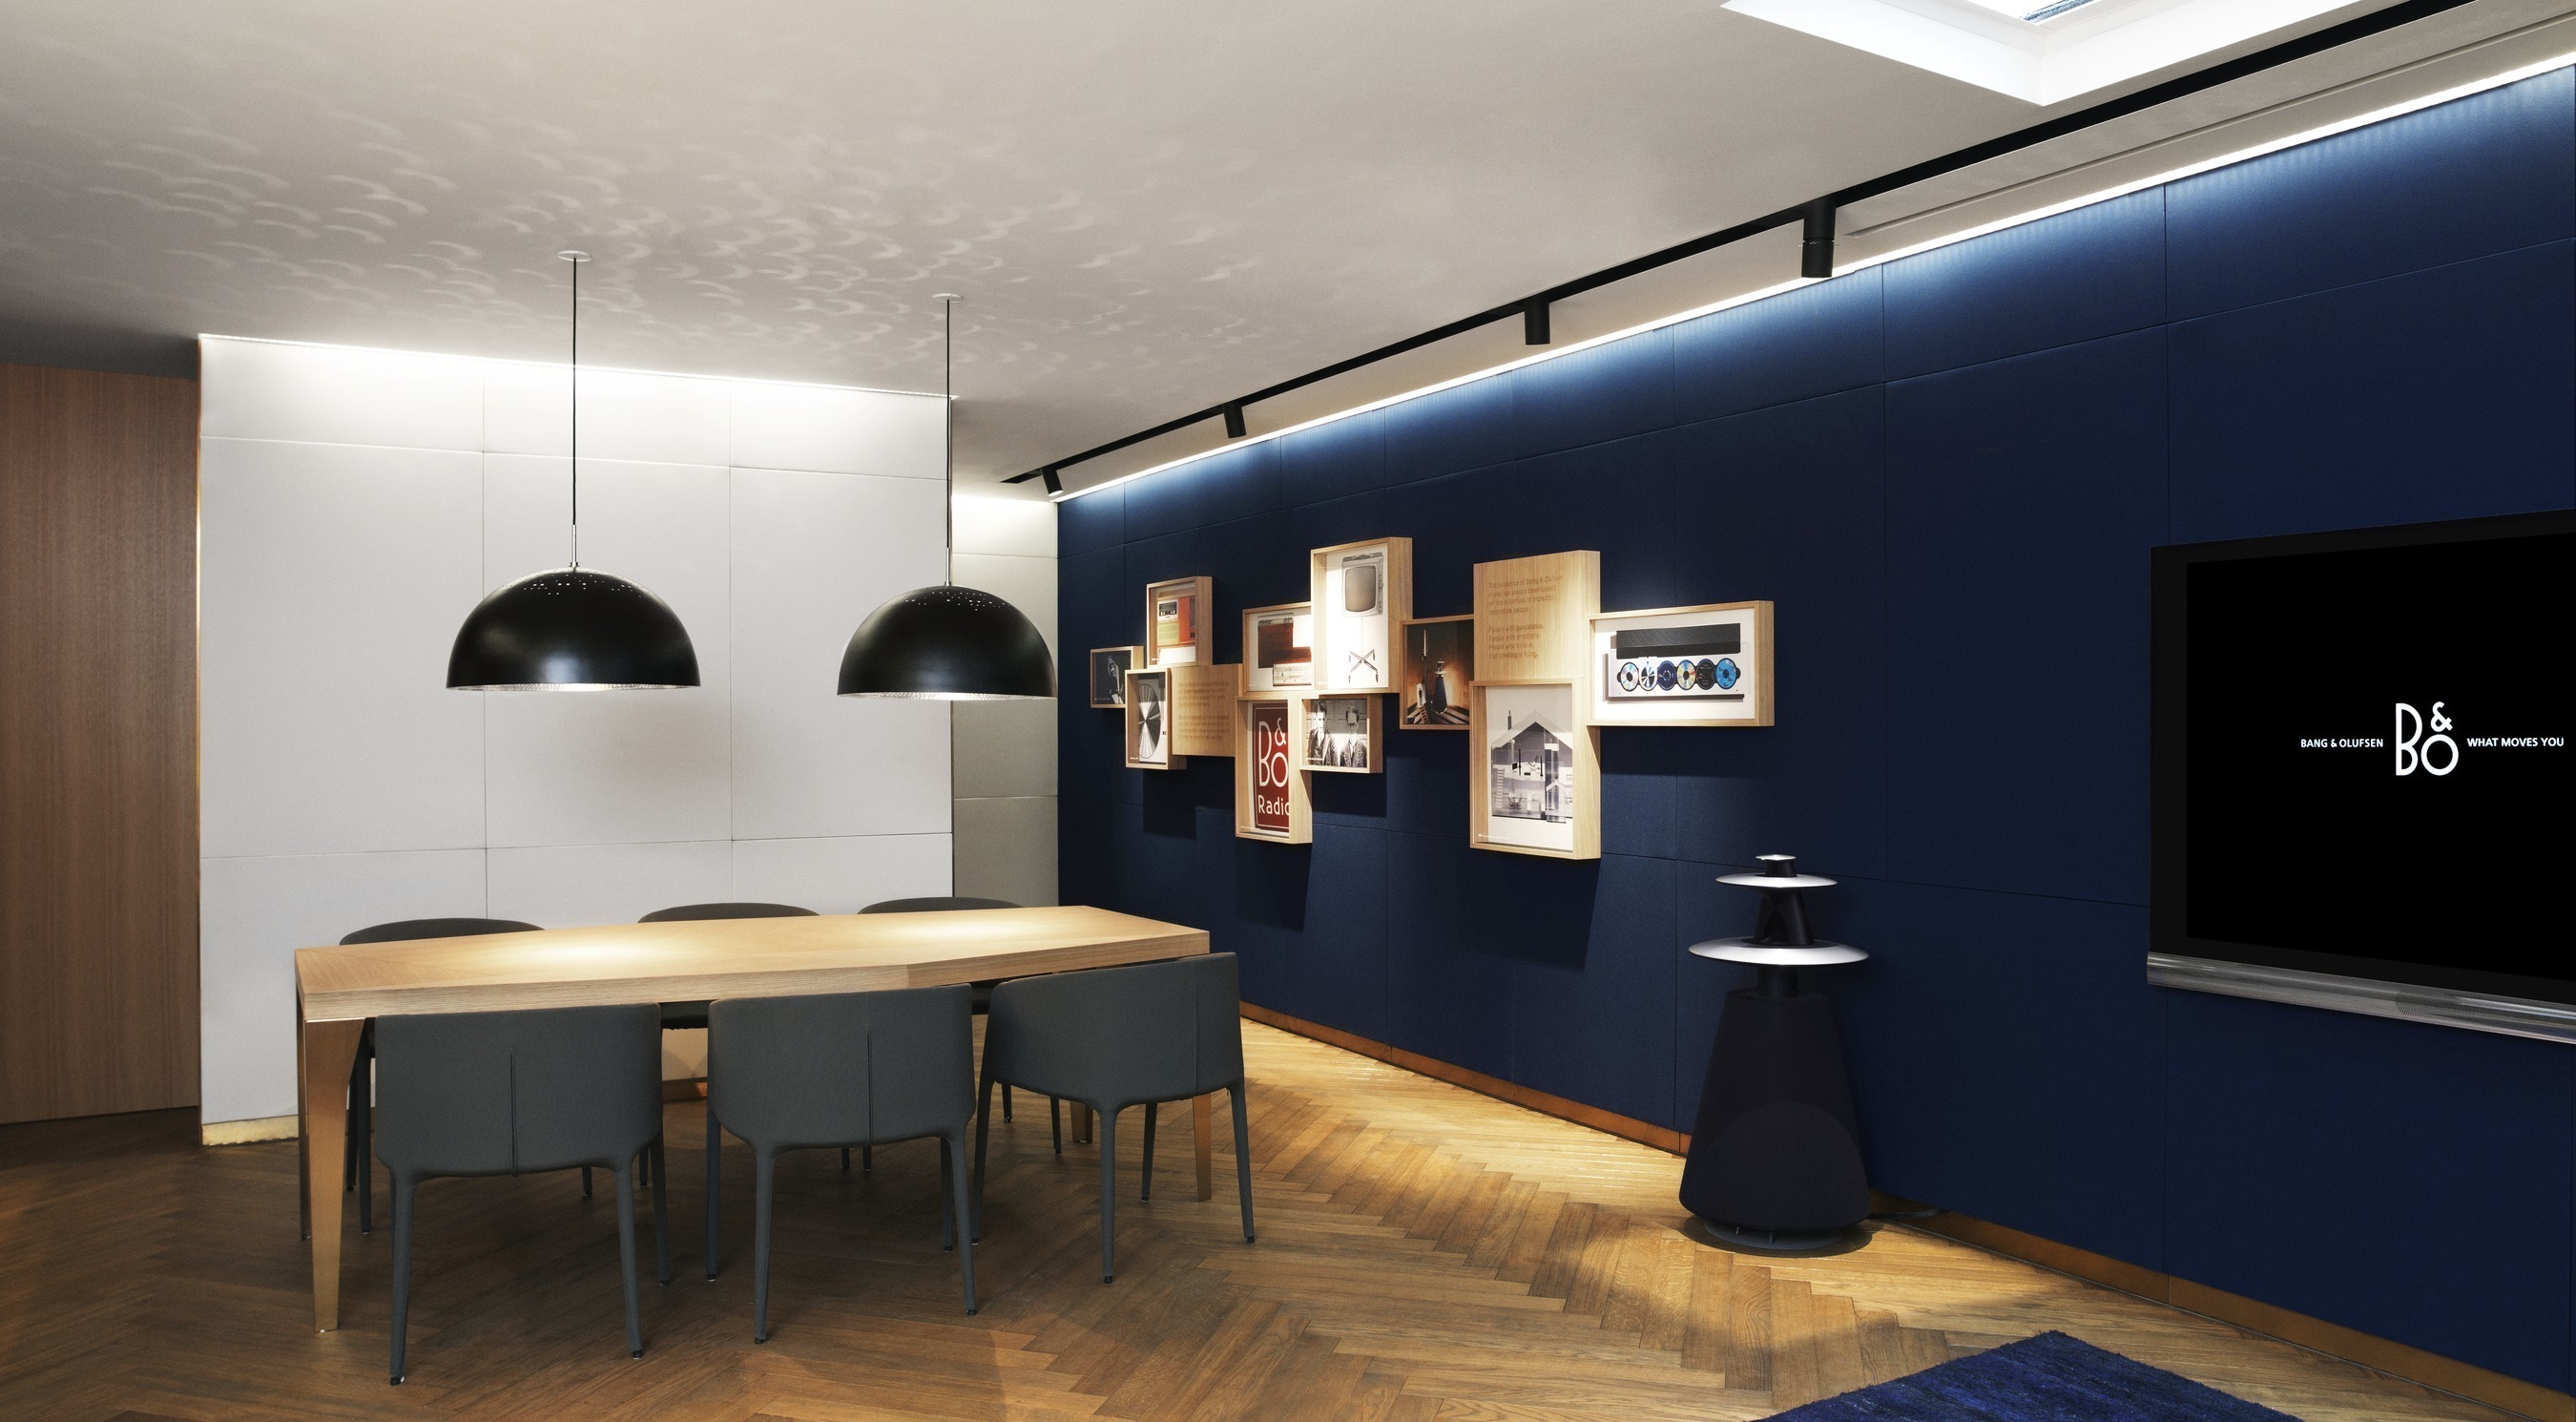 Bang & Olufsen launches next-generation retail concept in North America (PRNewsFoto/Bang & Olufsen) (PRNewsFoto/Bang & Olufsen)